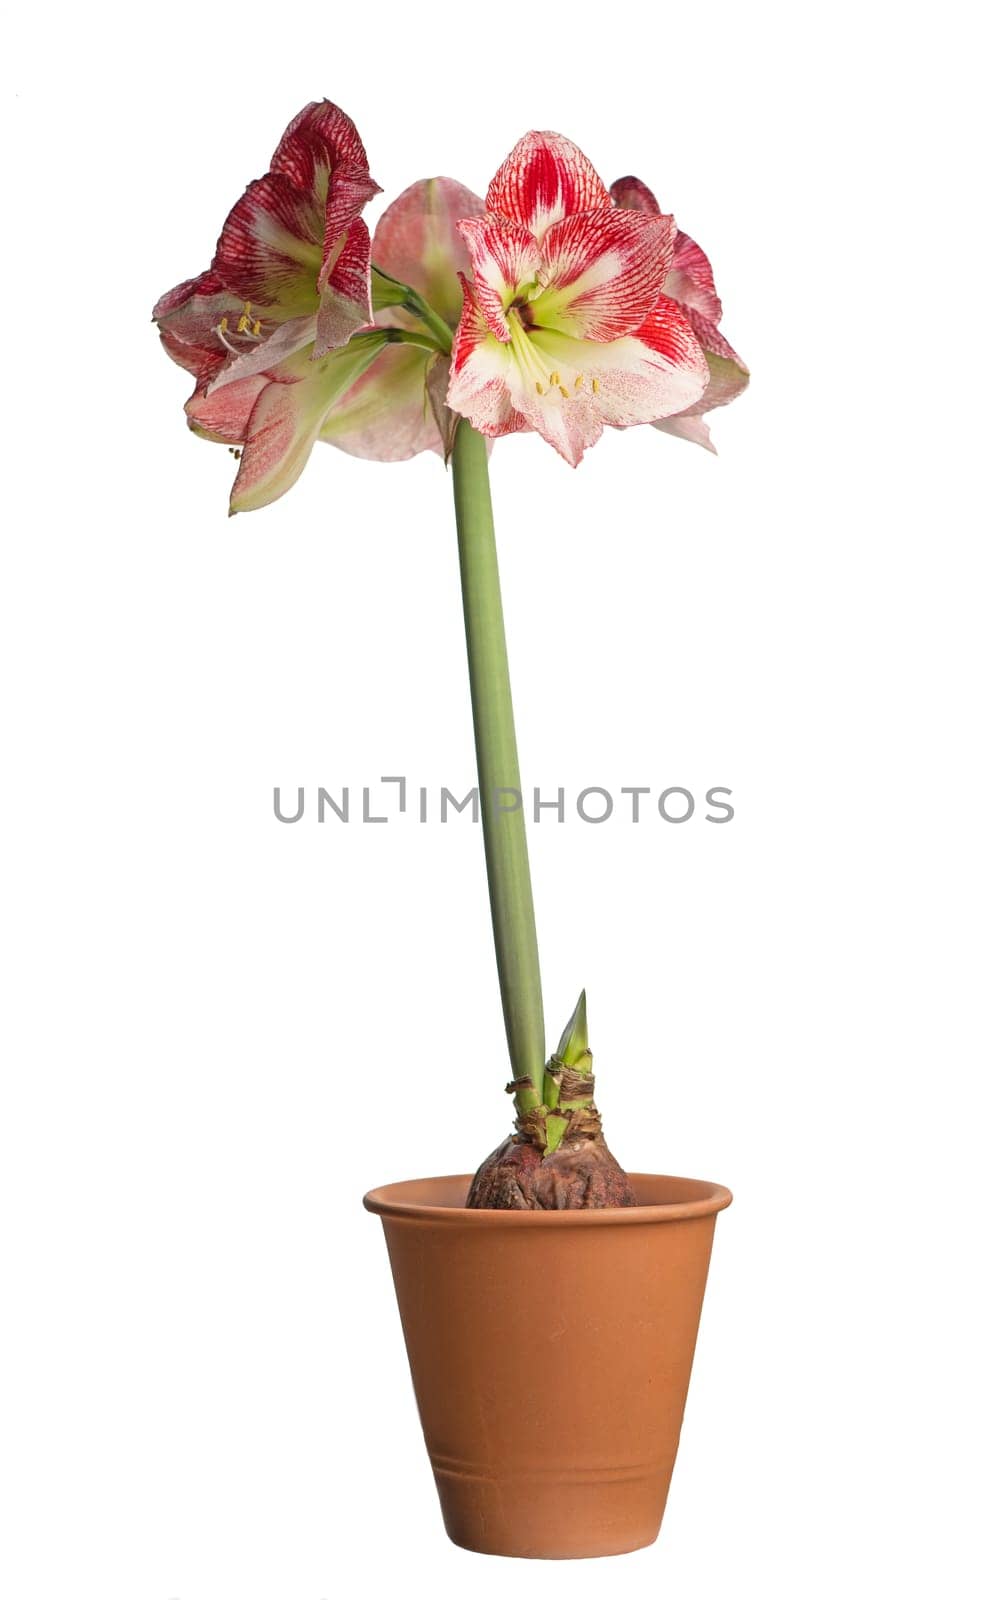 Red amaryllis flower blooming isolated with clipping path on white background,Amaryllis,Hippeastrums flowers